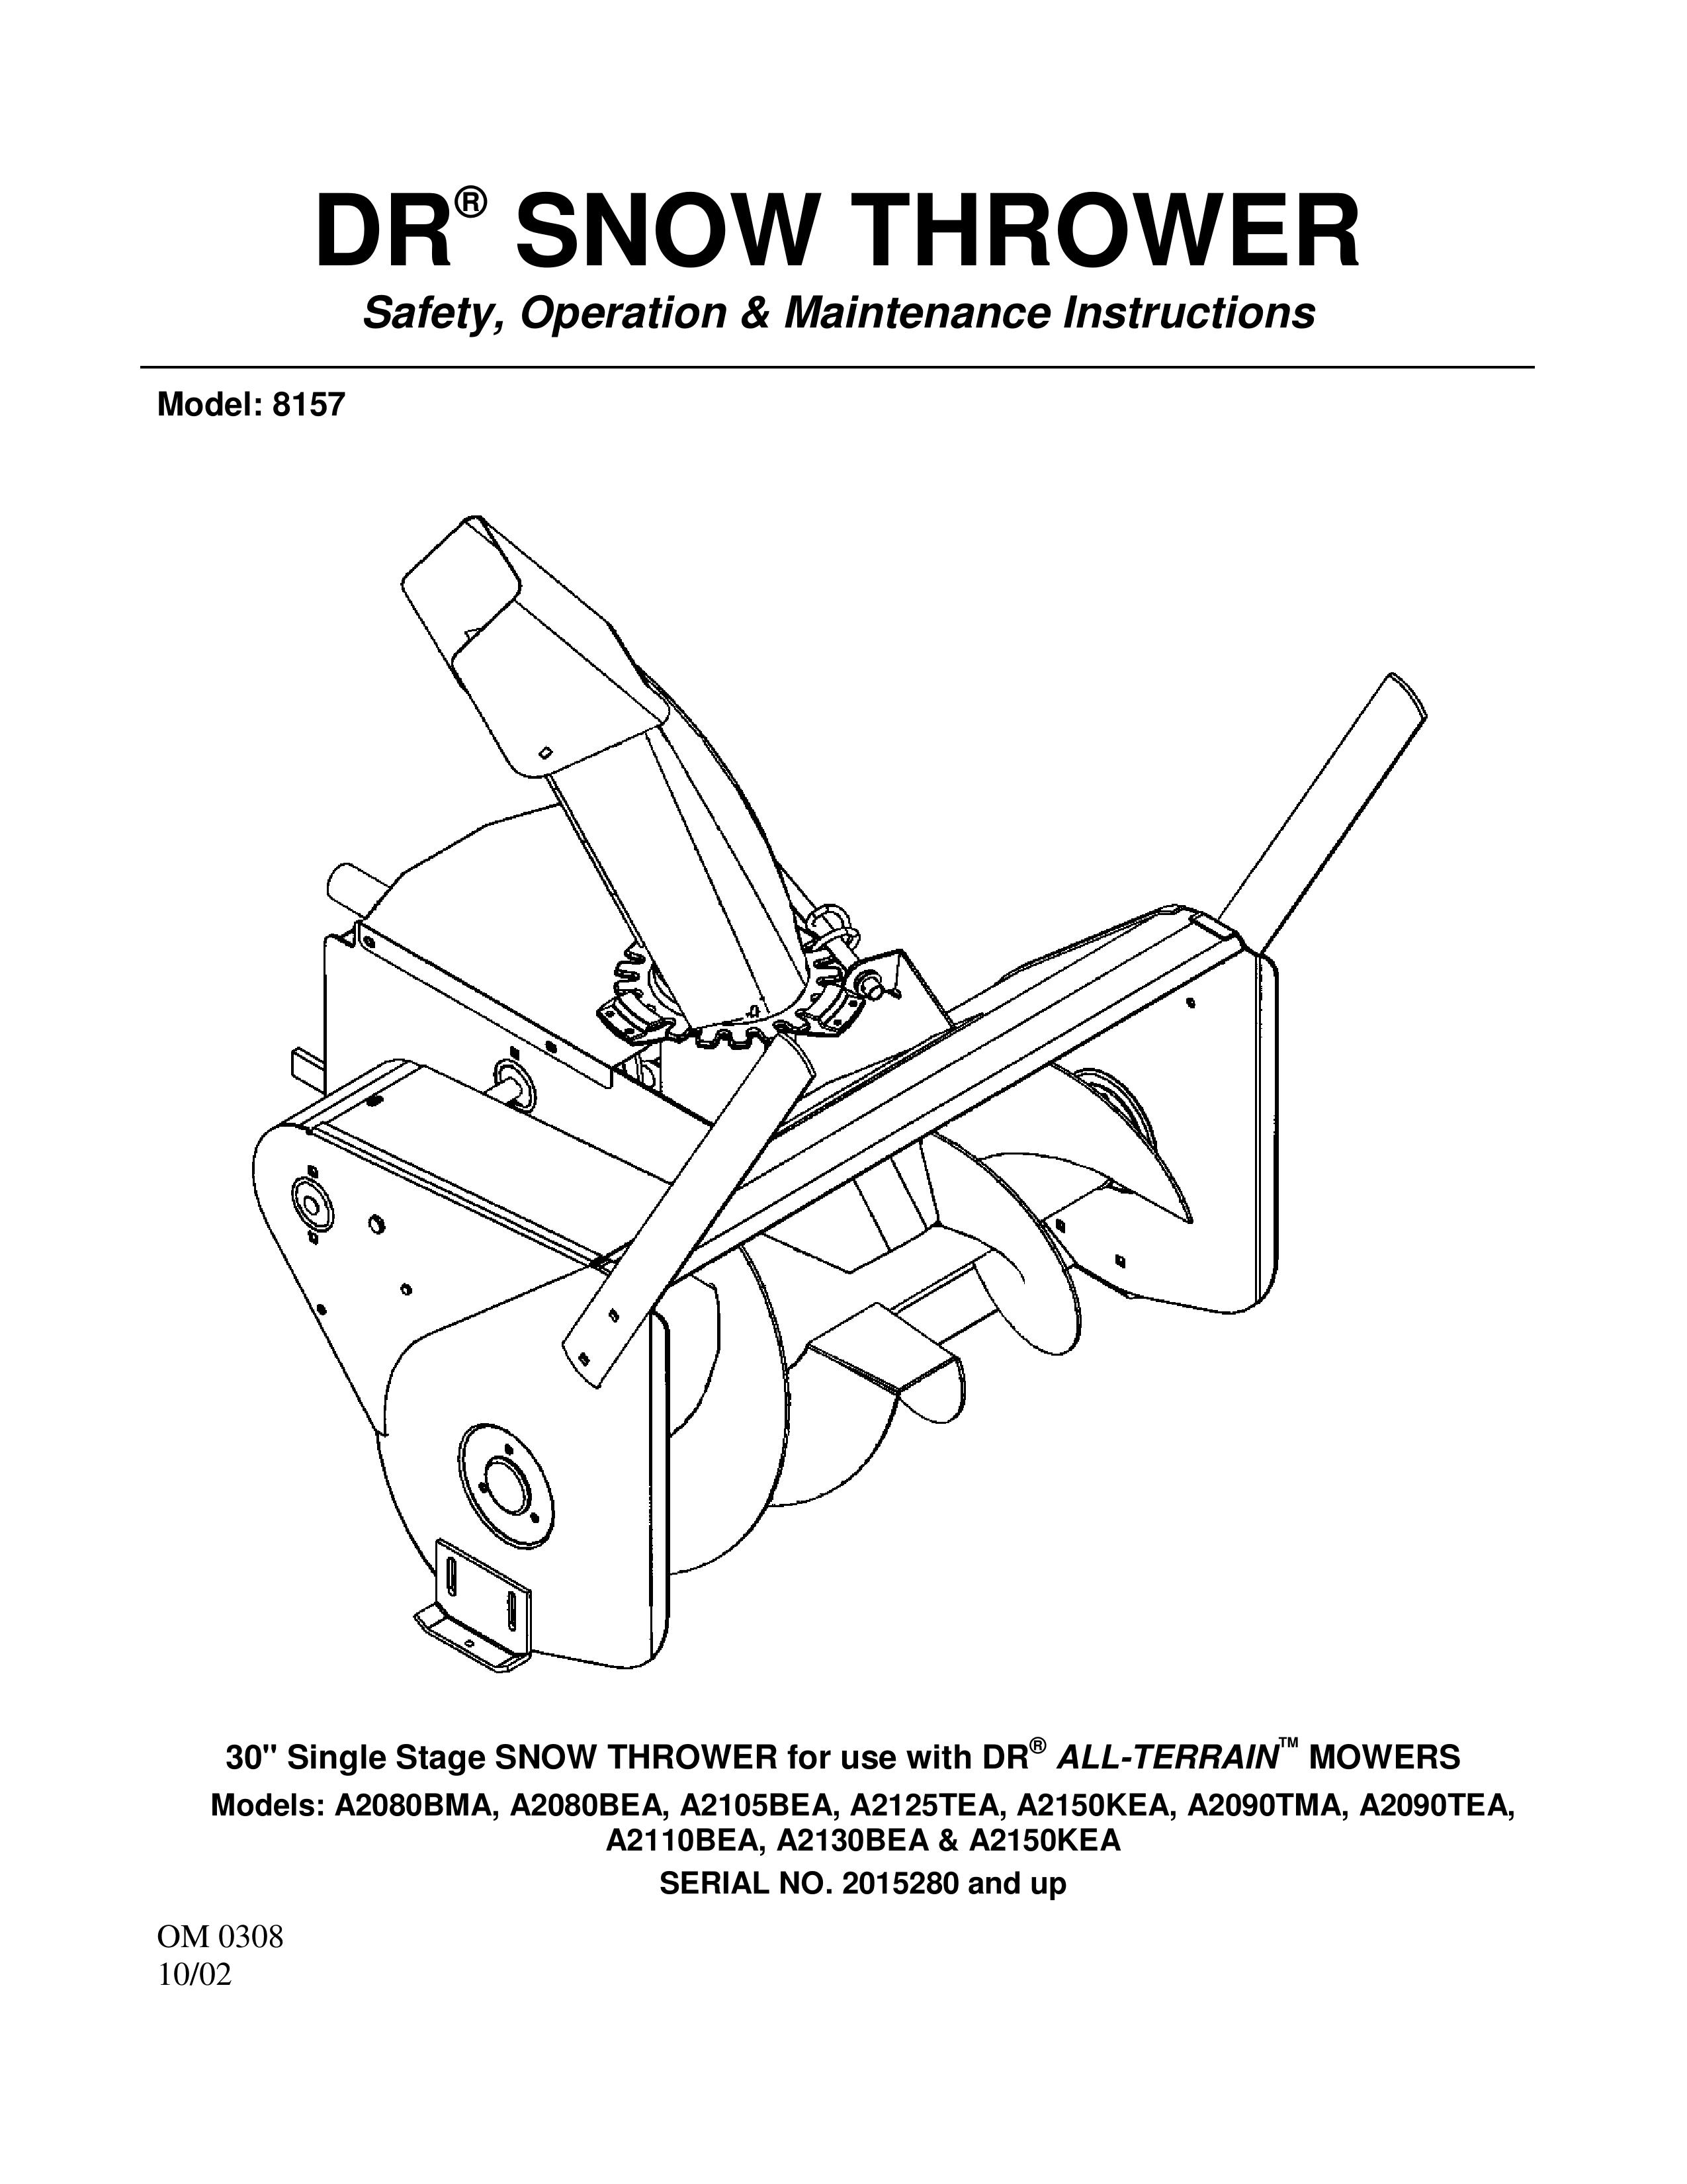 Country Home Products A2150KEA Snow Blower User Manual